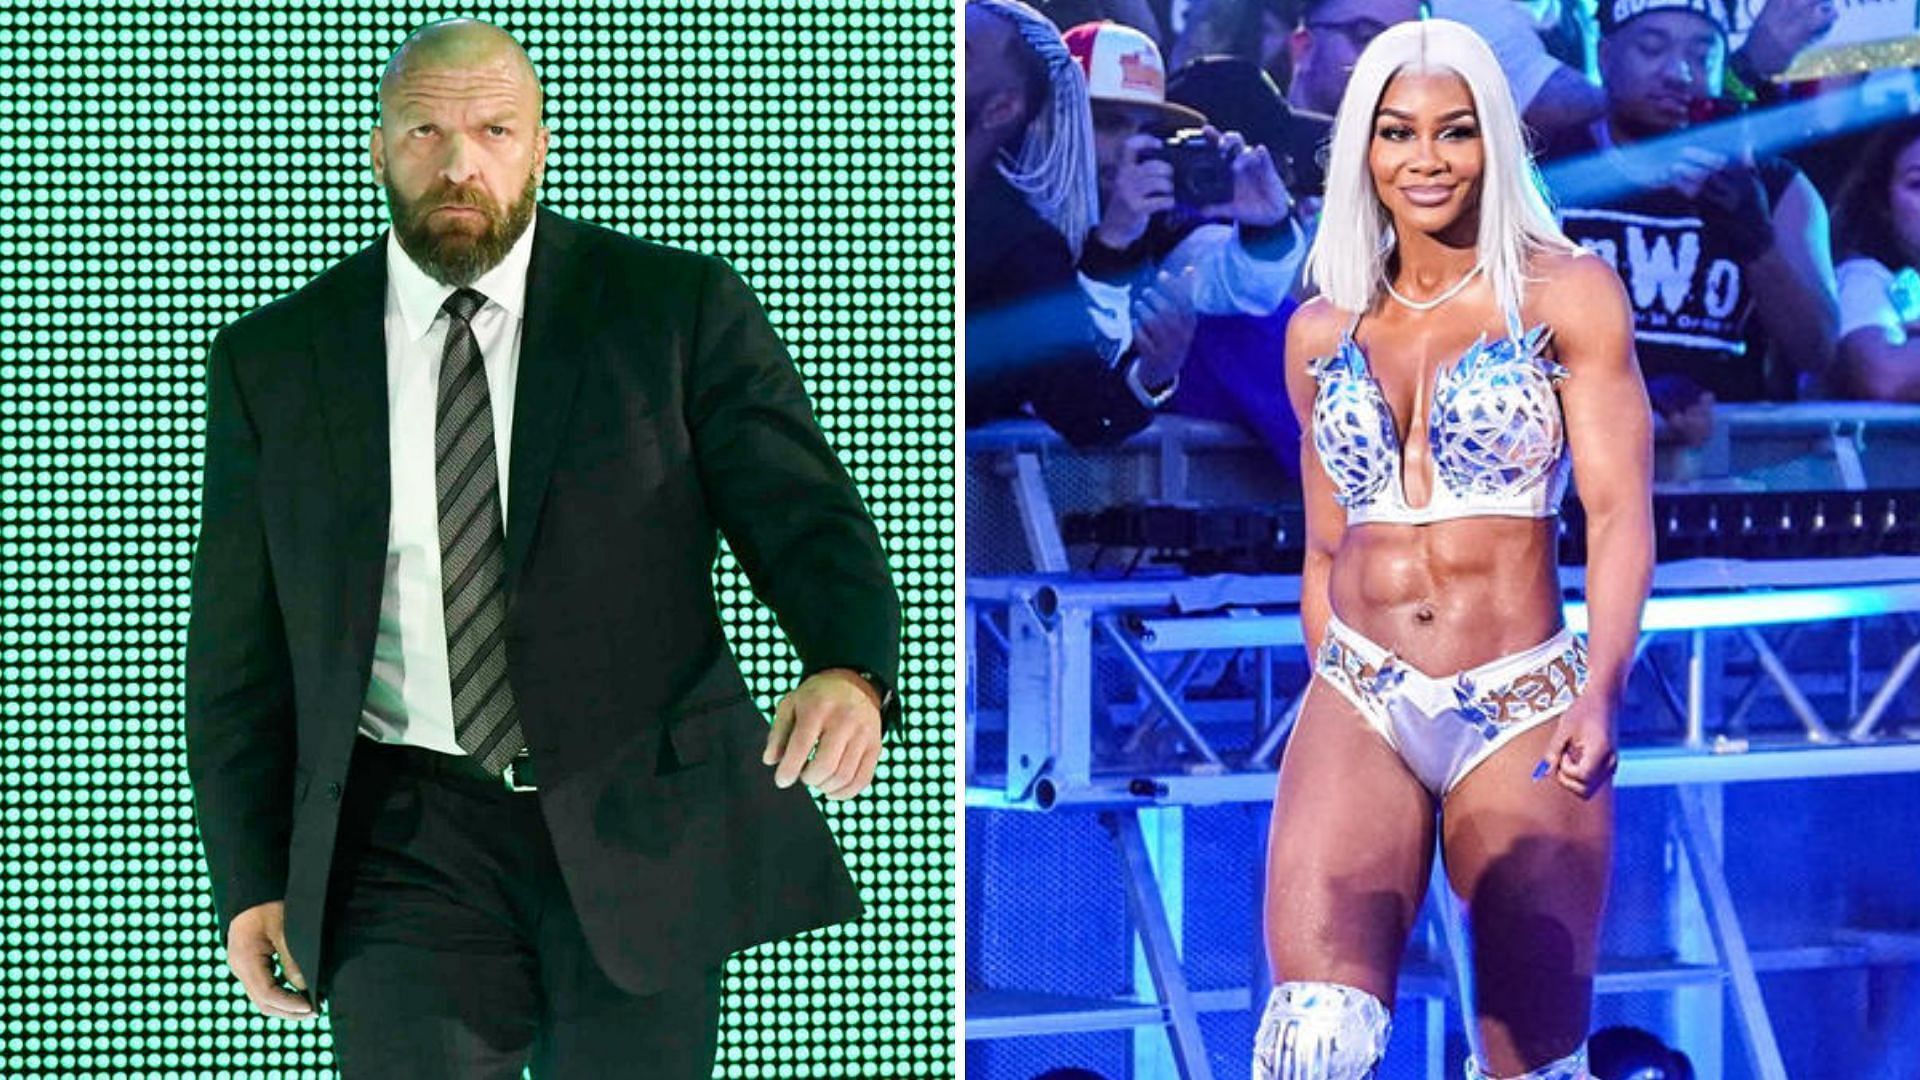 Triple H made a great acquisition with Jade Cargill